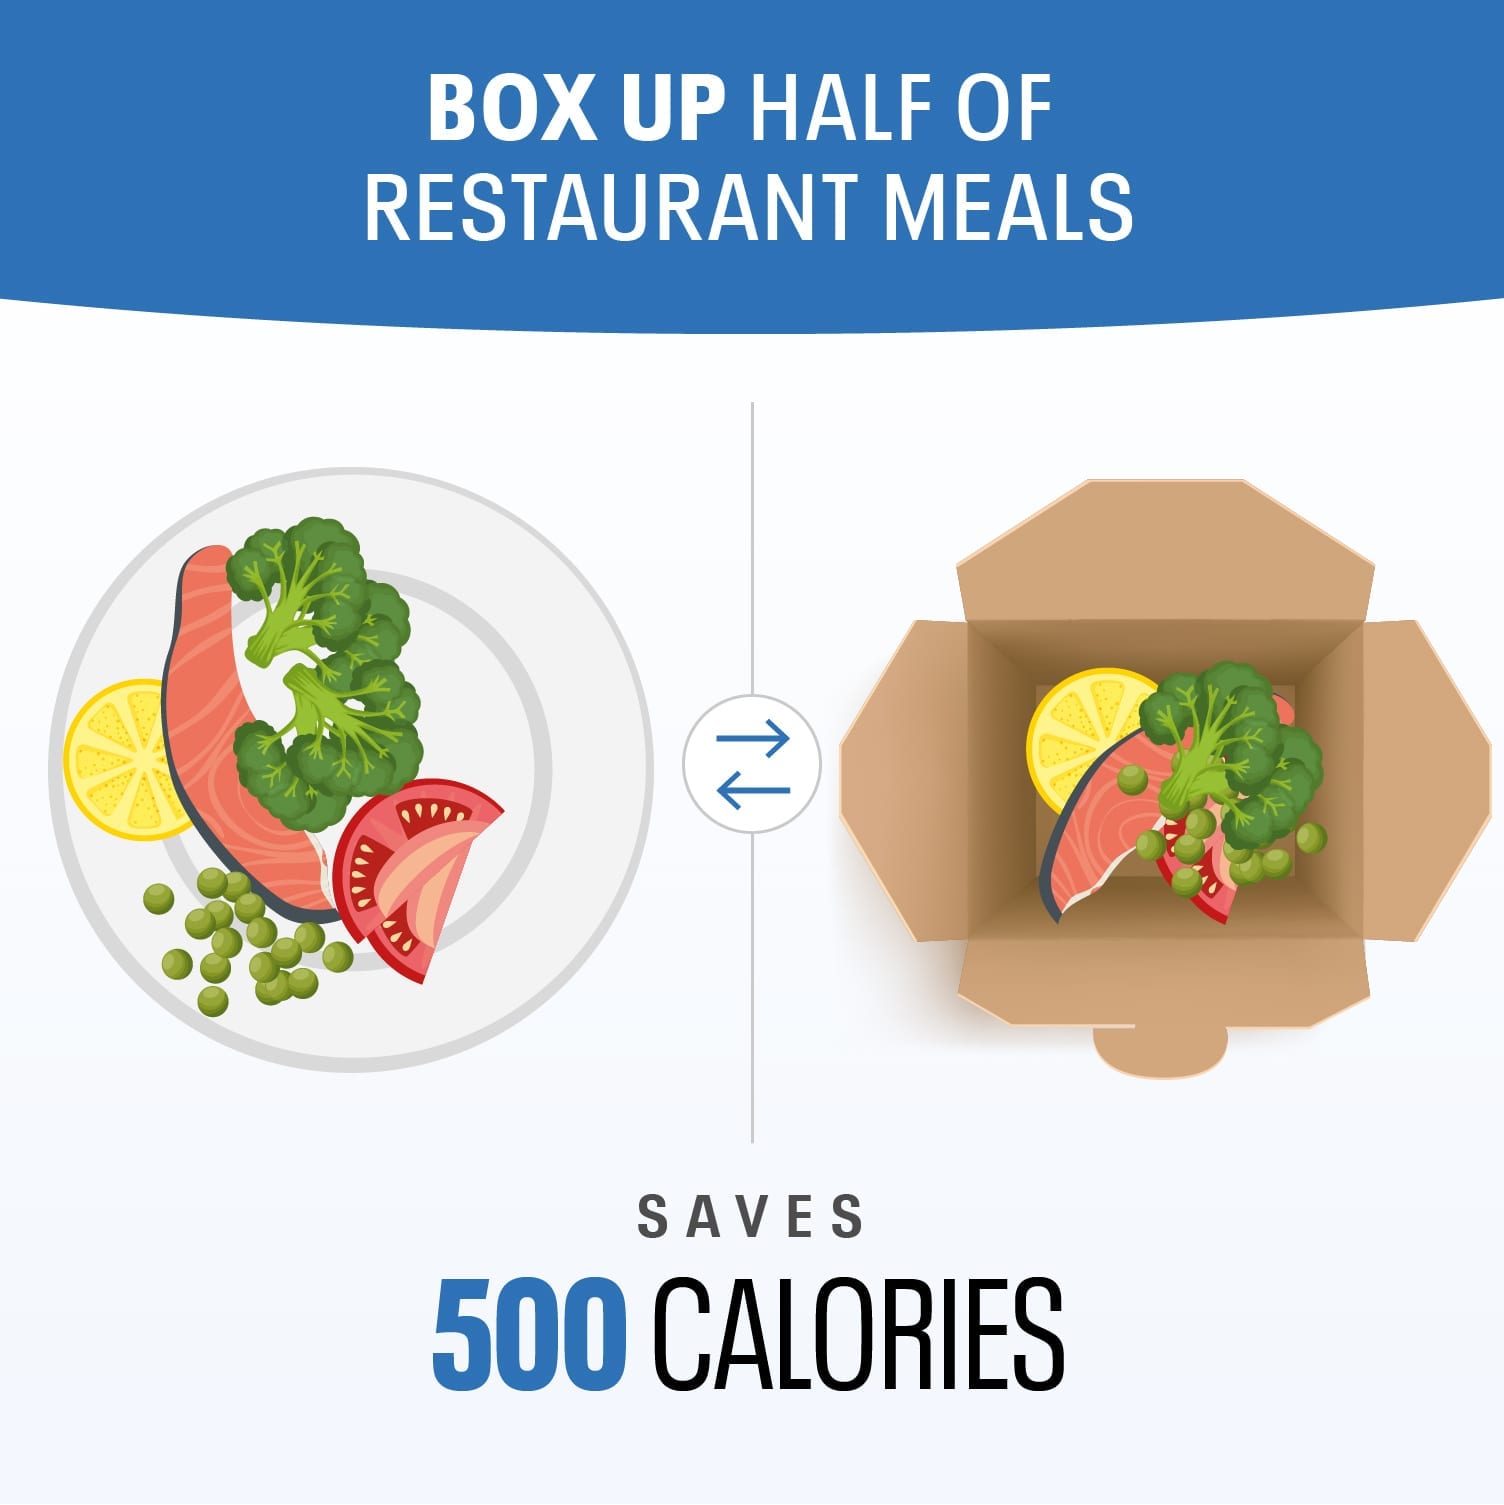 23 Easy Ways To Cut Up To 500 Calories | Weight Loss | Myfitnesspal